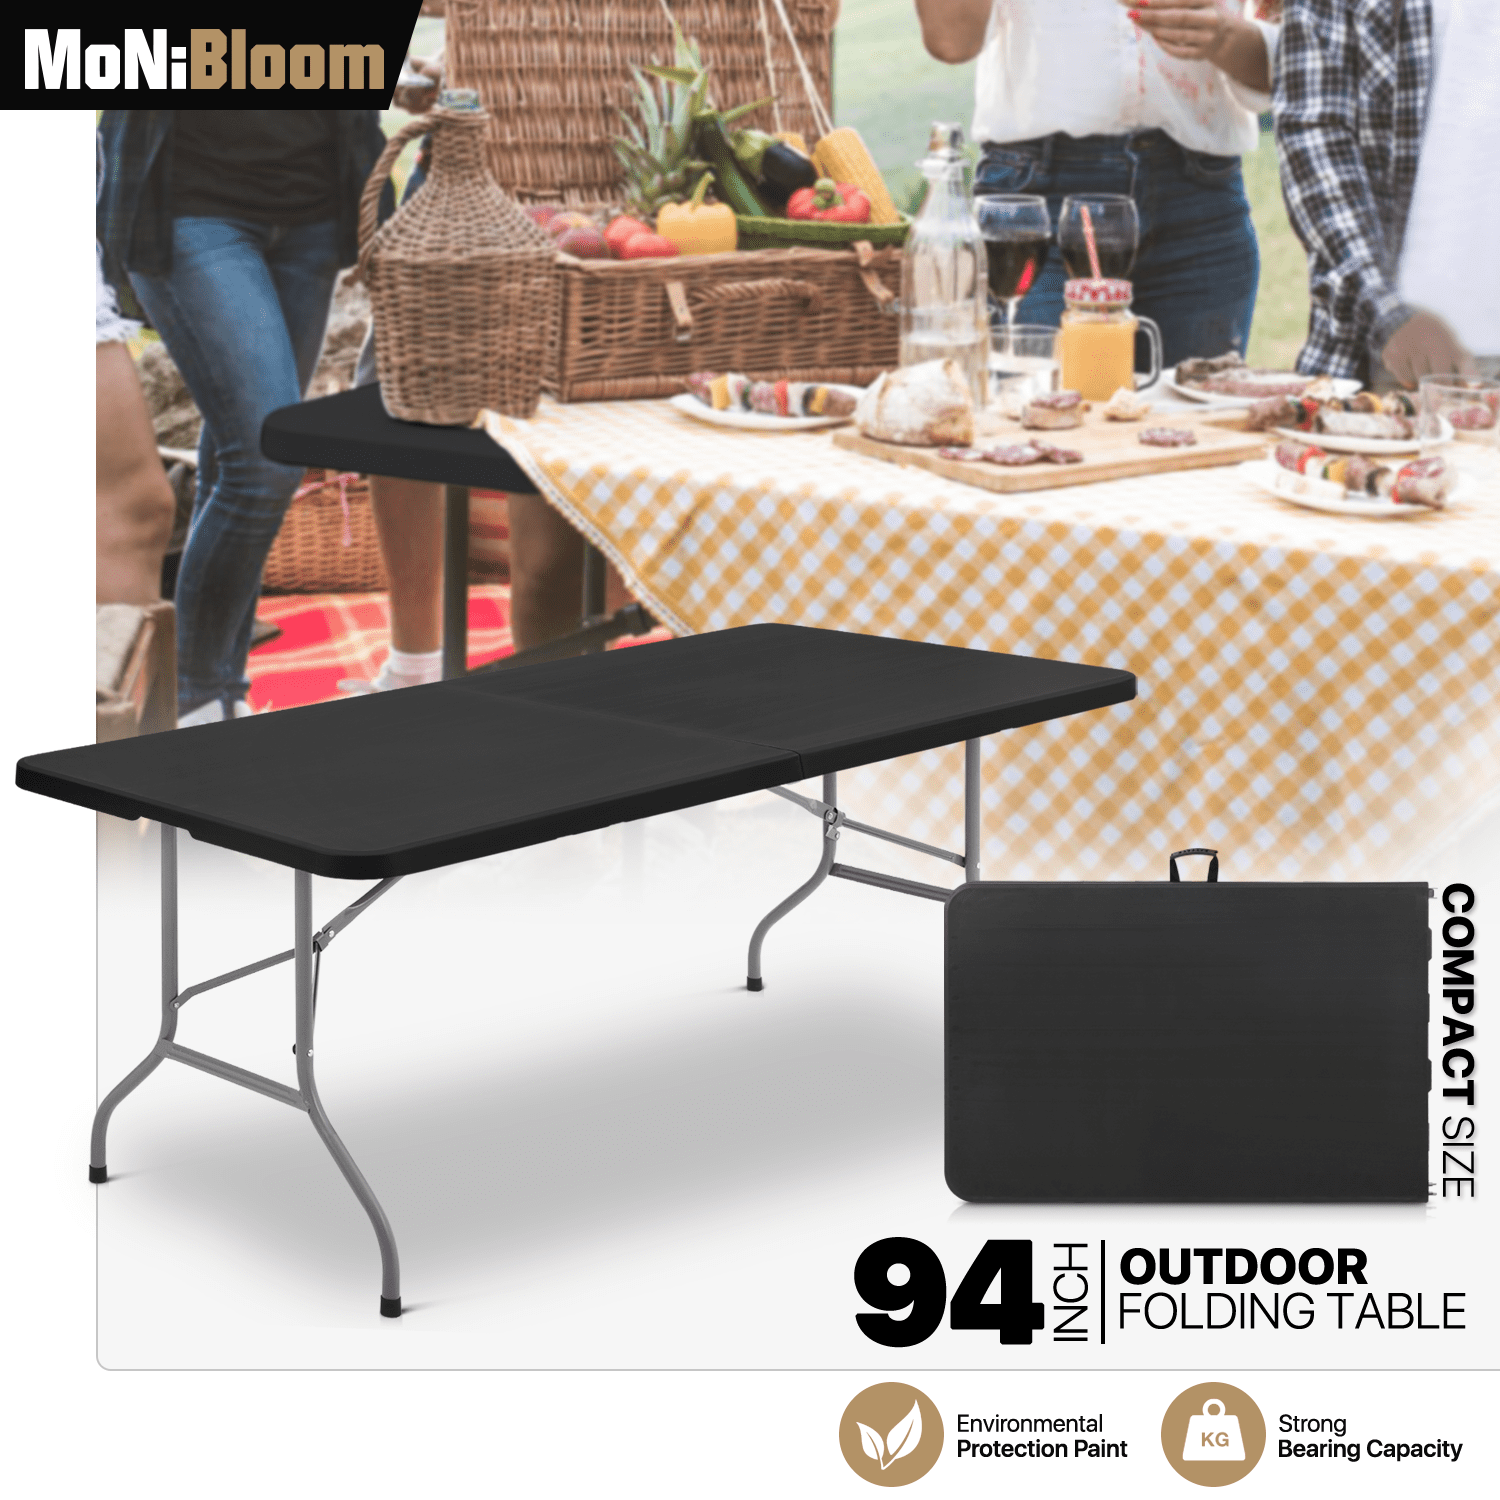 Camping 8FT Rectangle Handle, Carrying Folding Dining Outdoor for MoNiBloom Table Camping Desk Party Black Outdoor Table BBQ Plastic with